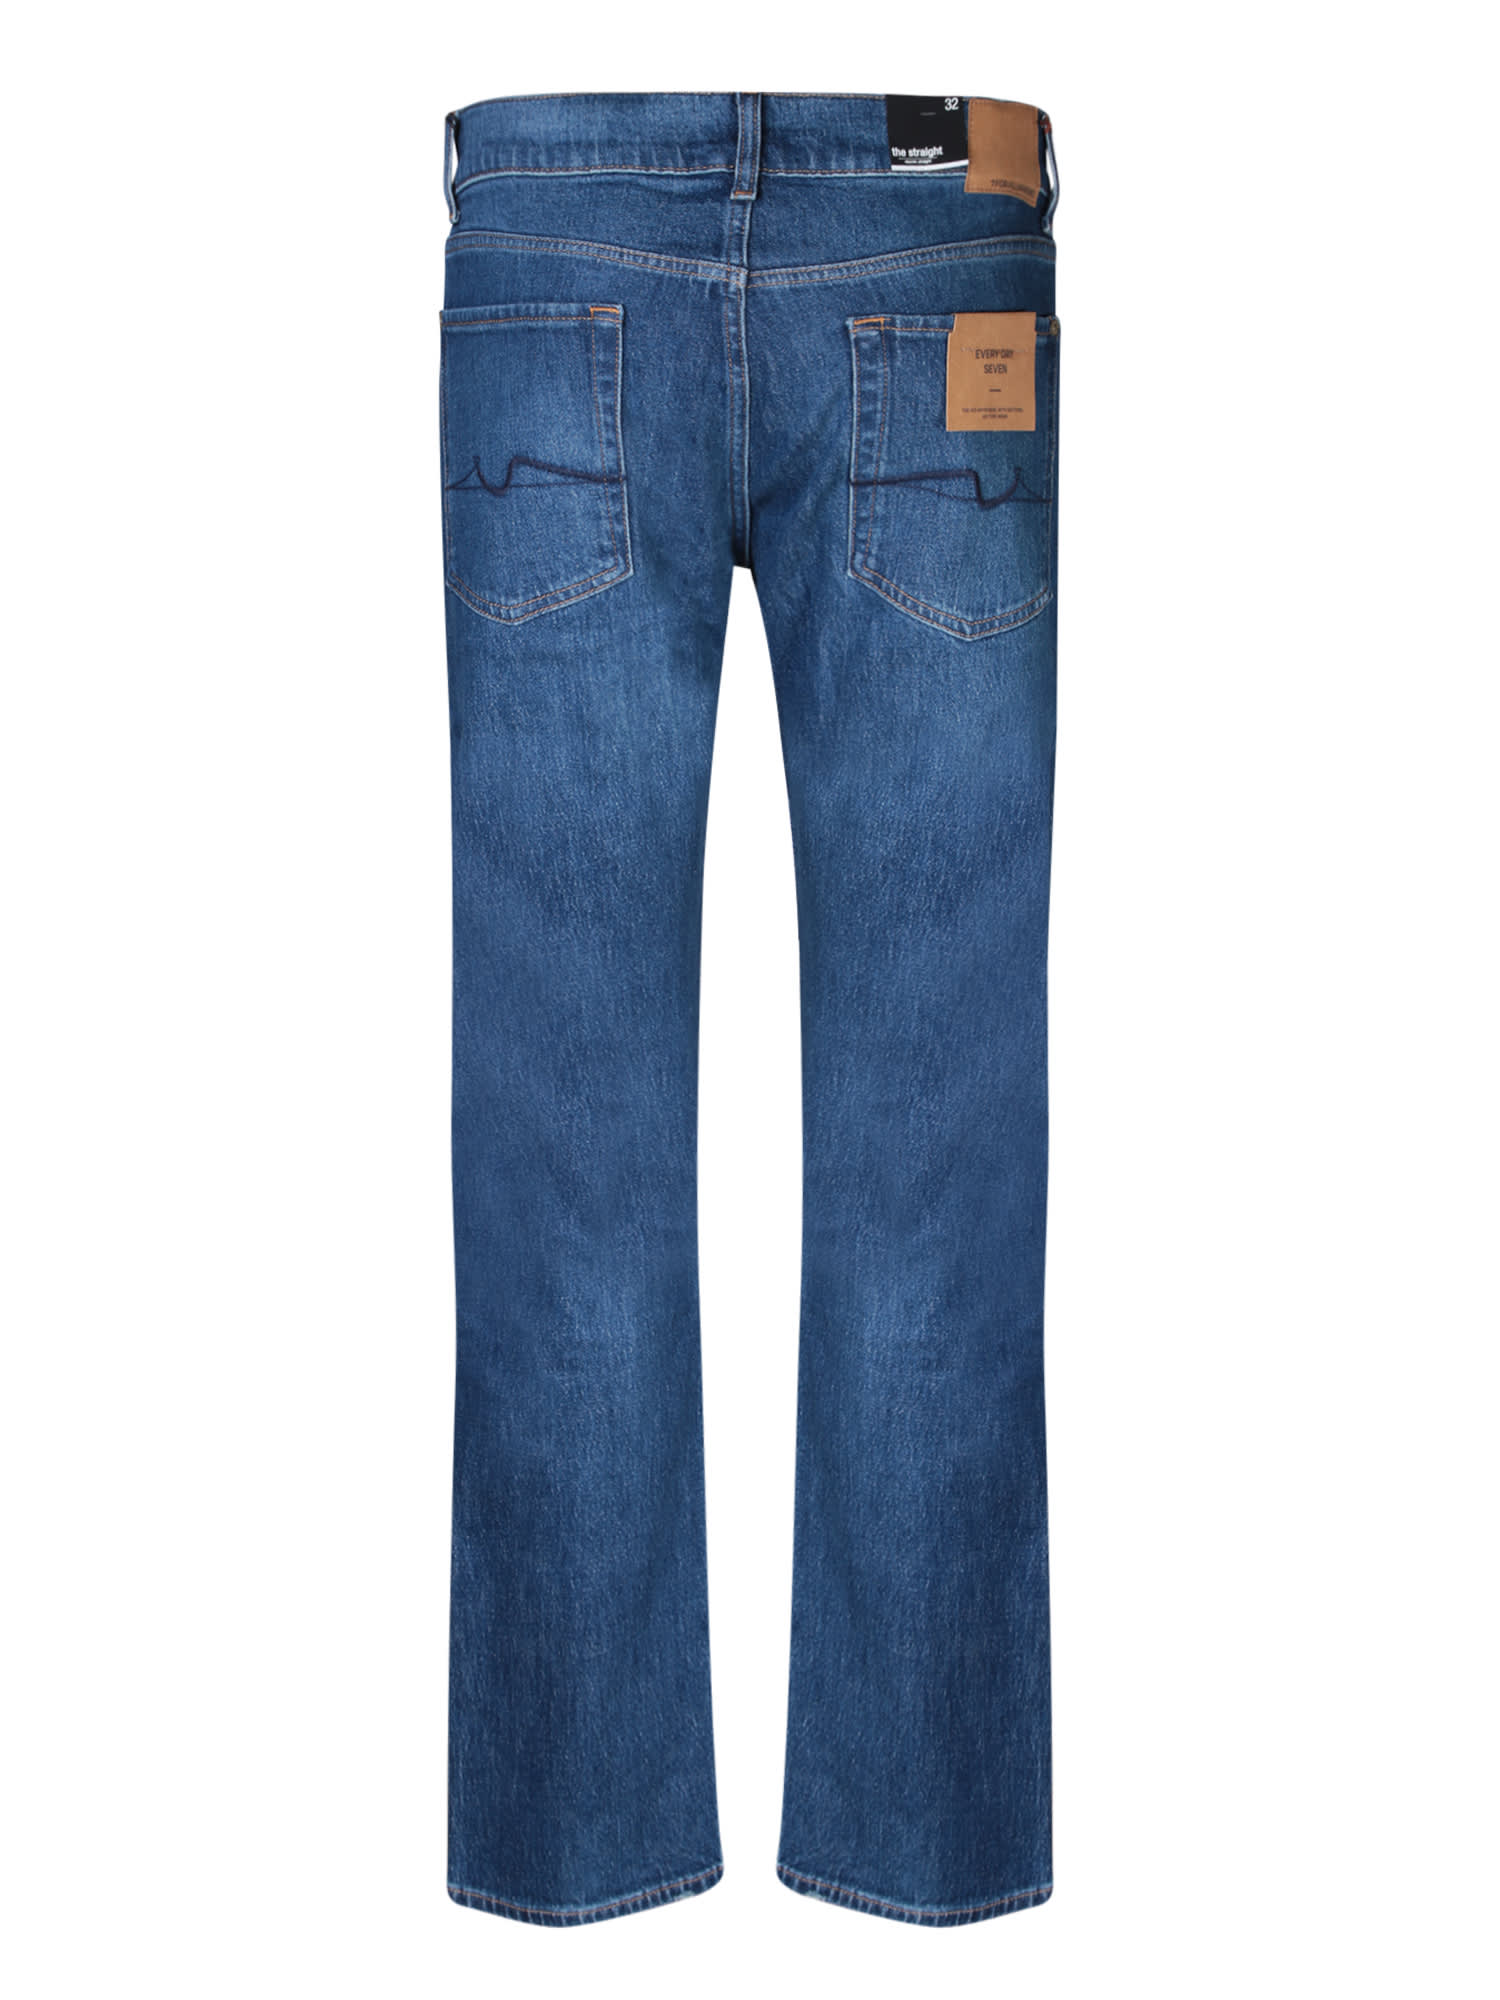 Shop 7 For All Mankind The Straight Exchange Blue Jeans